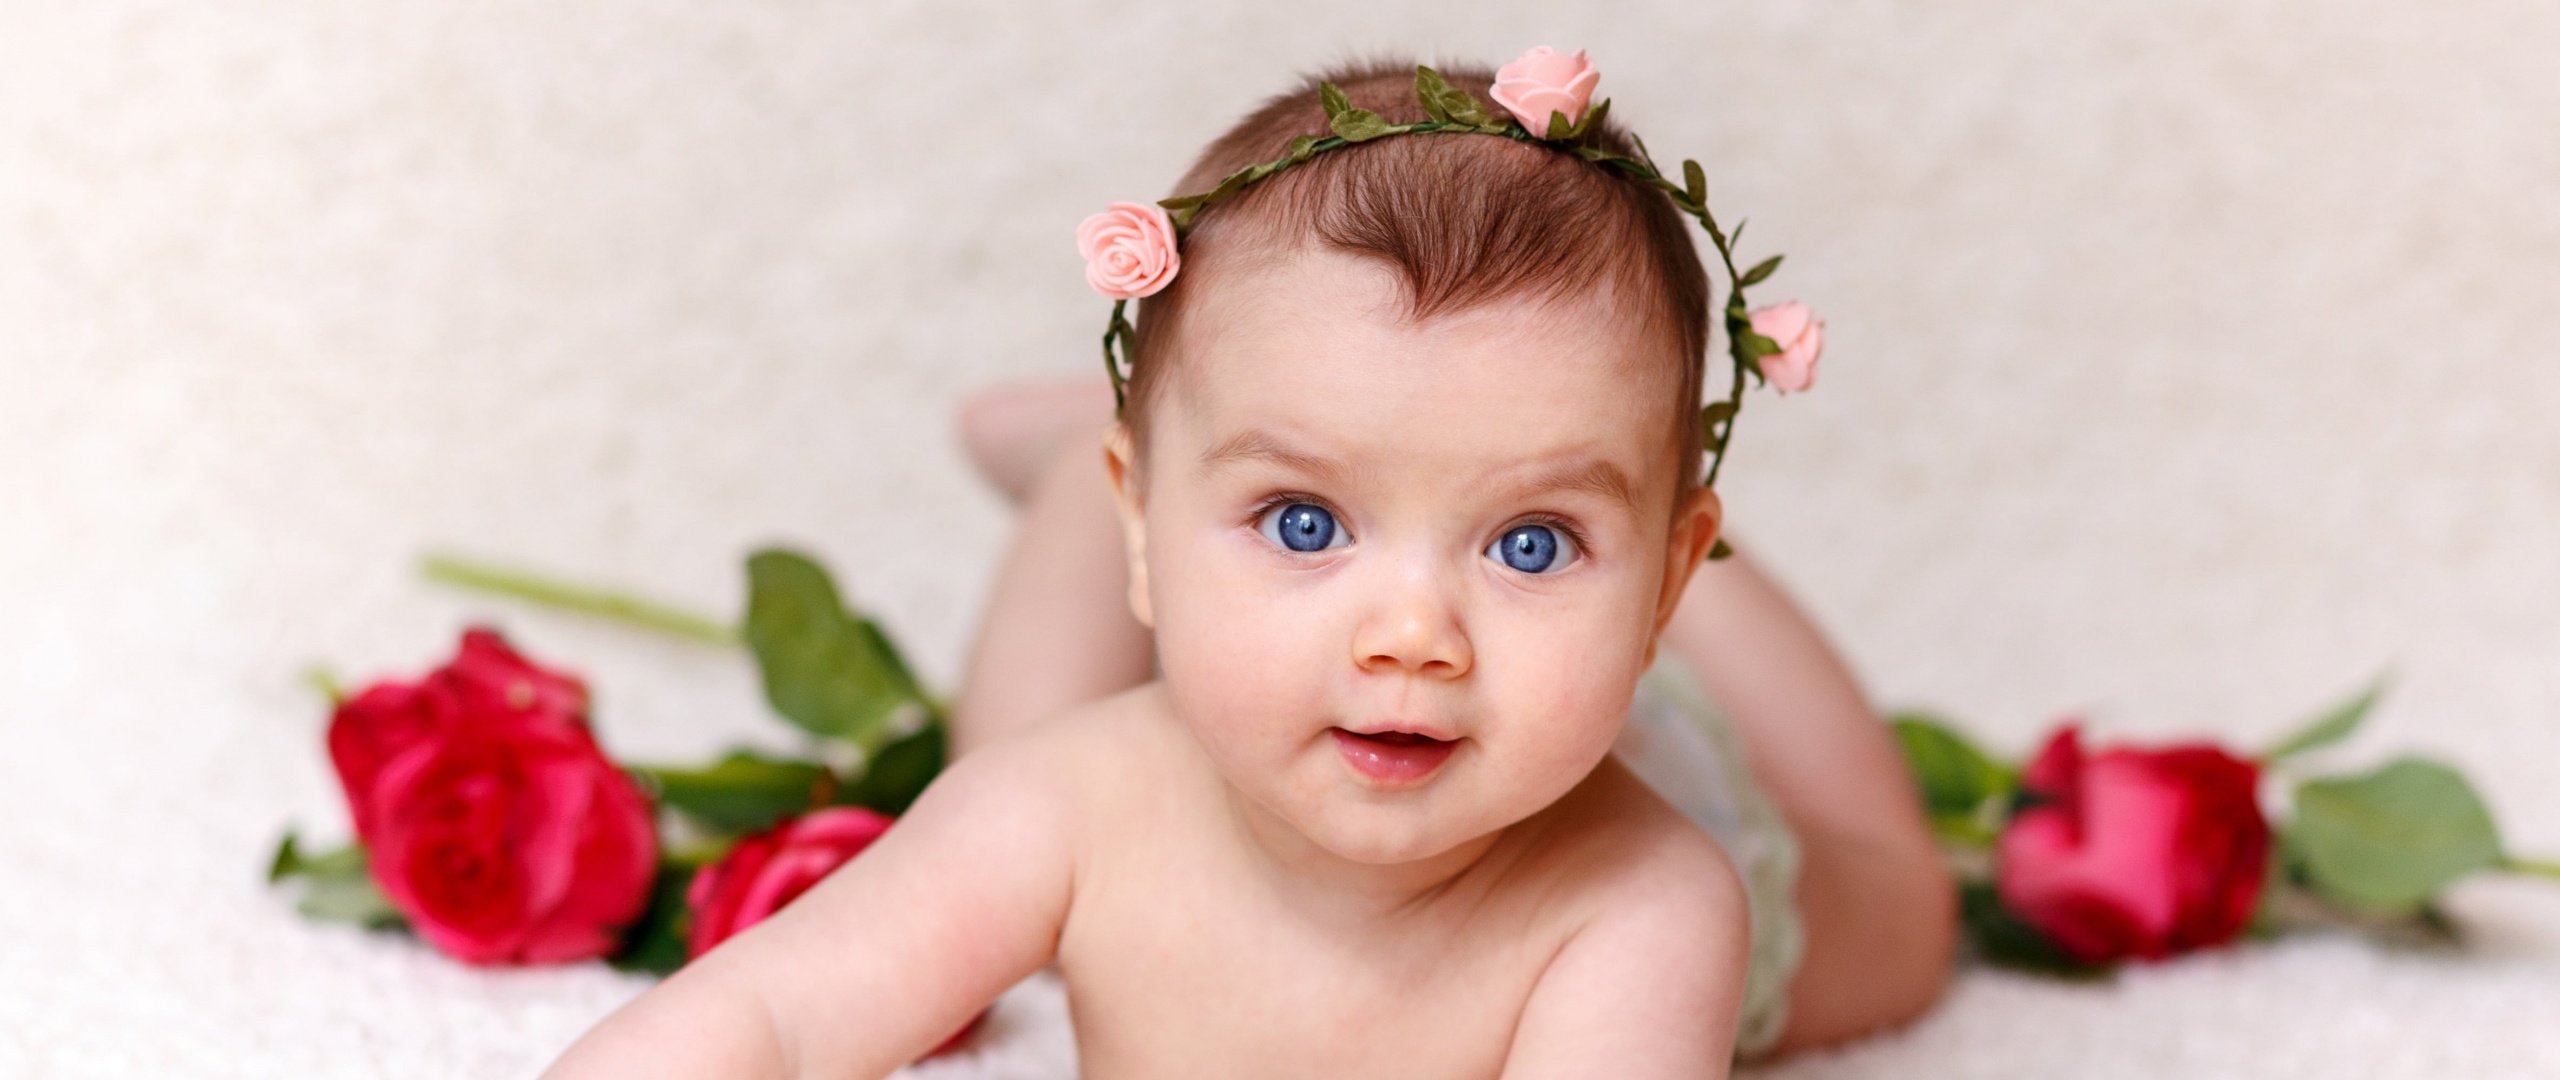 Cute Baby Girl Stock Photos and Images - 123RF